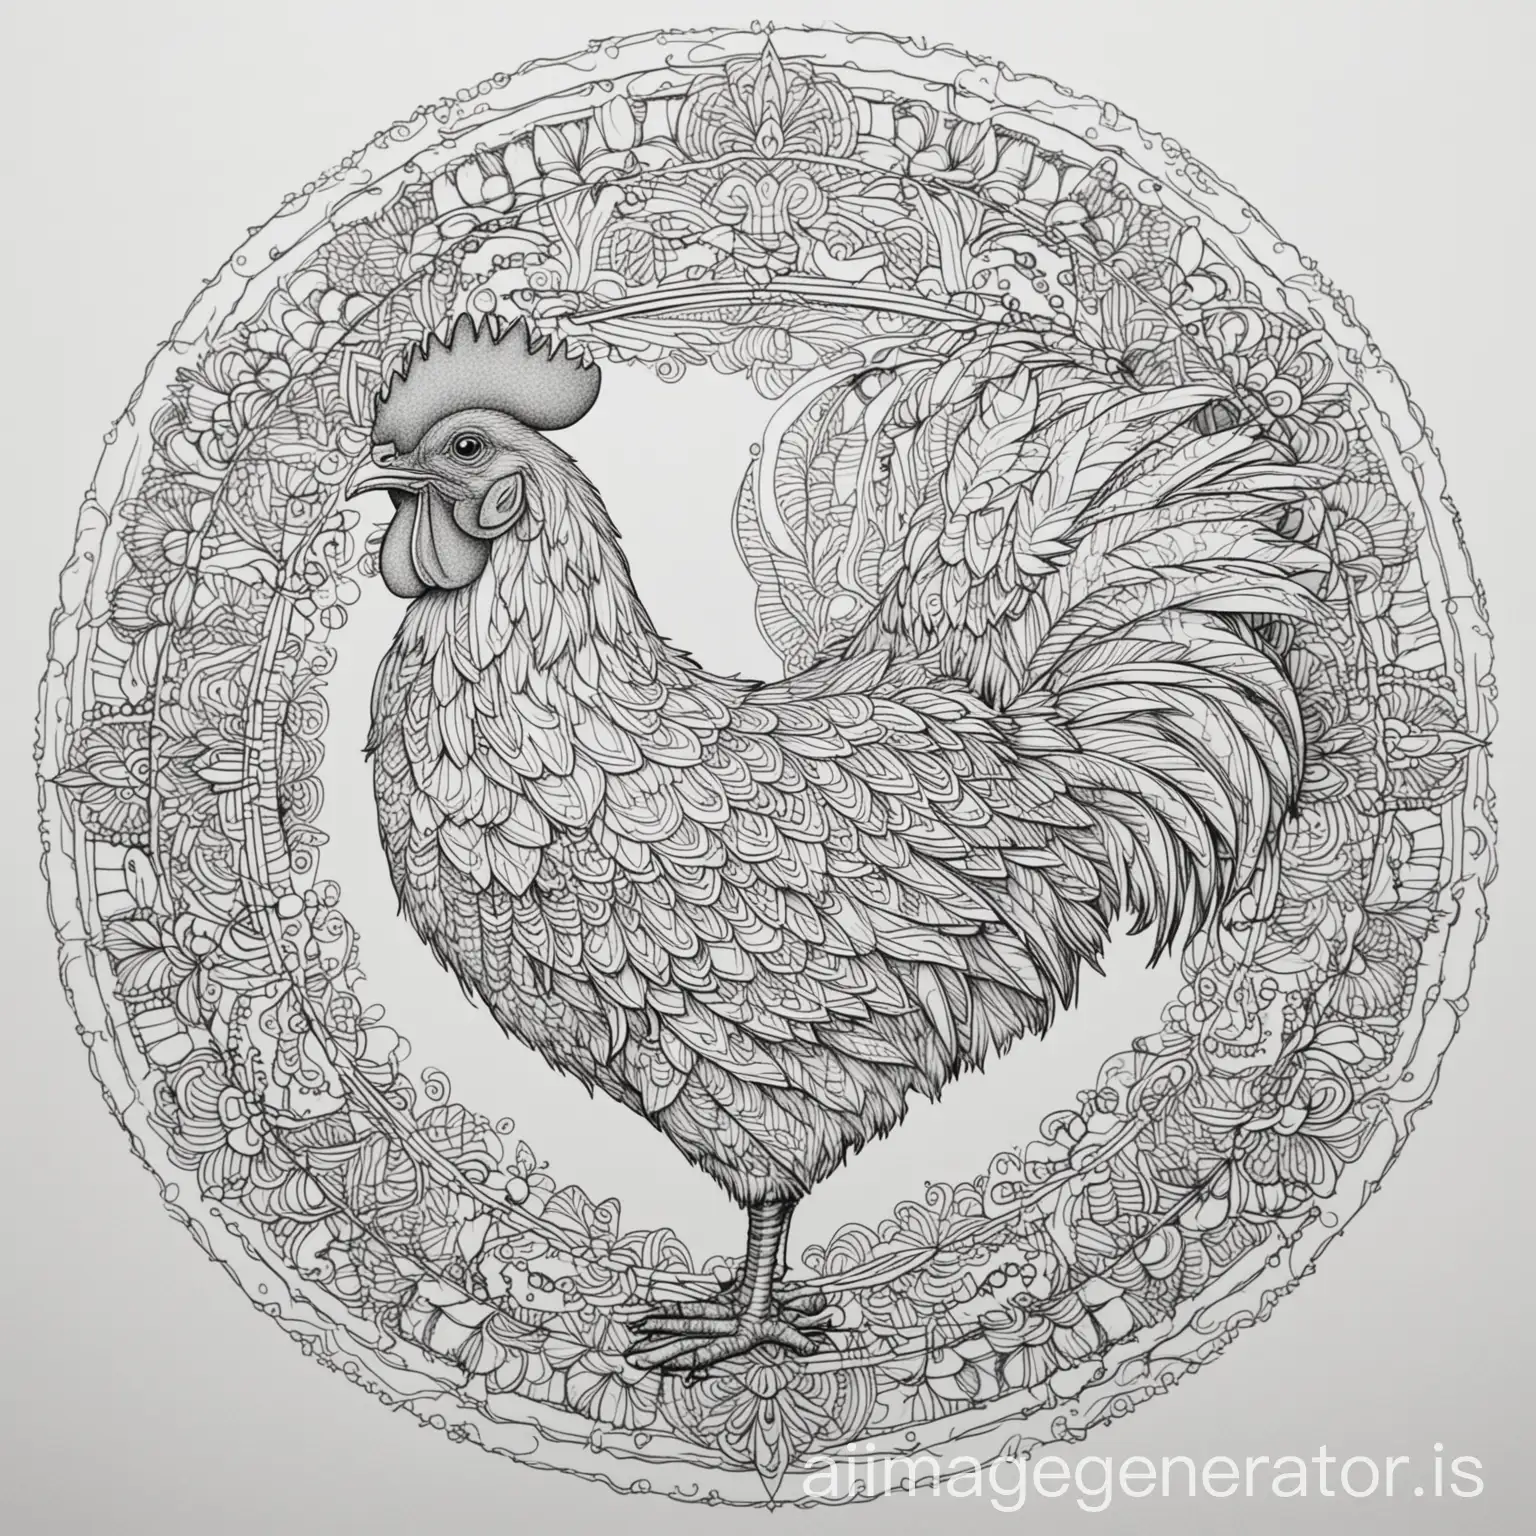 coloring page for adult, mandala, Chicken image, white background, fine line art, aspect ratio 2:3